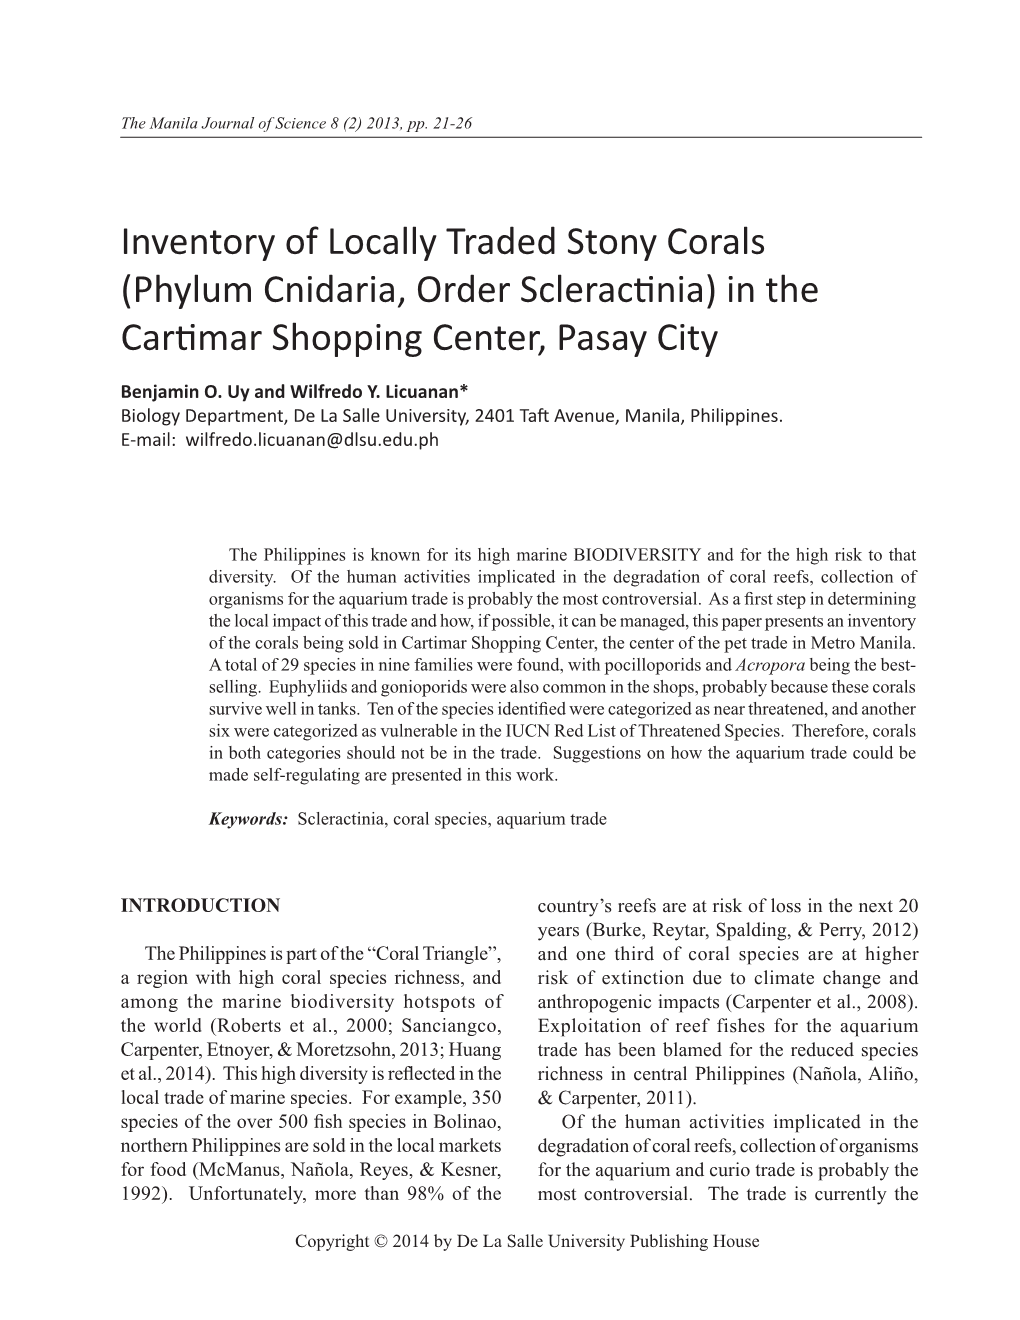 Inventory of Locally Traded Stony Corals (Phylum Cnidaria, Order Scleractinia) in the Cartimar Shopping Center, Pasay City